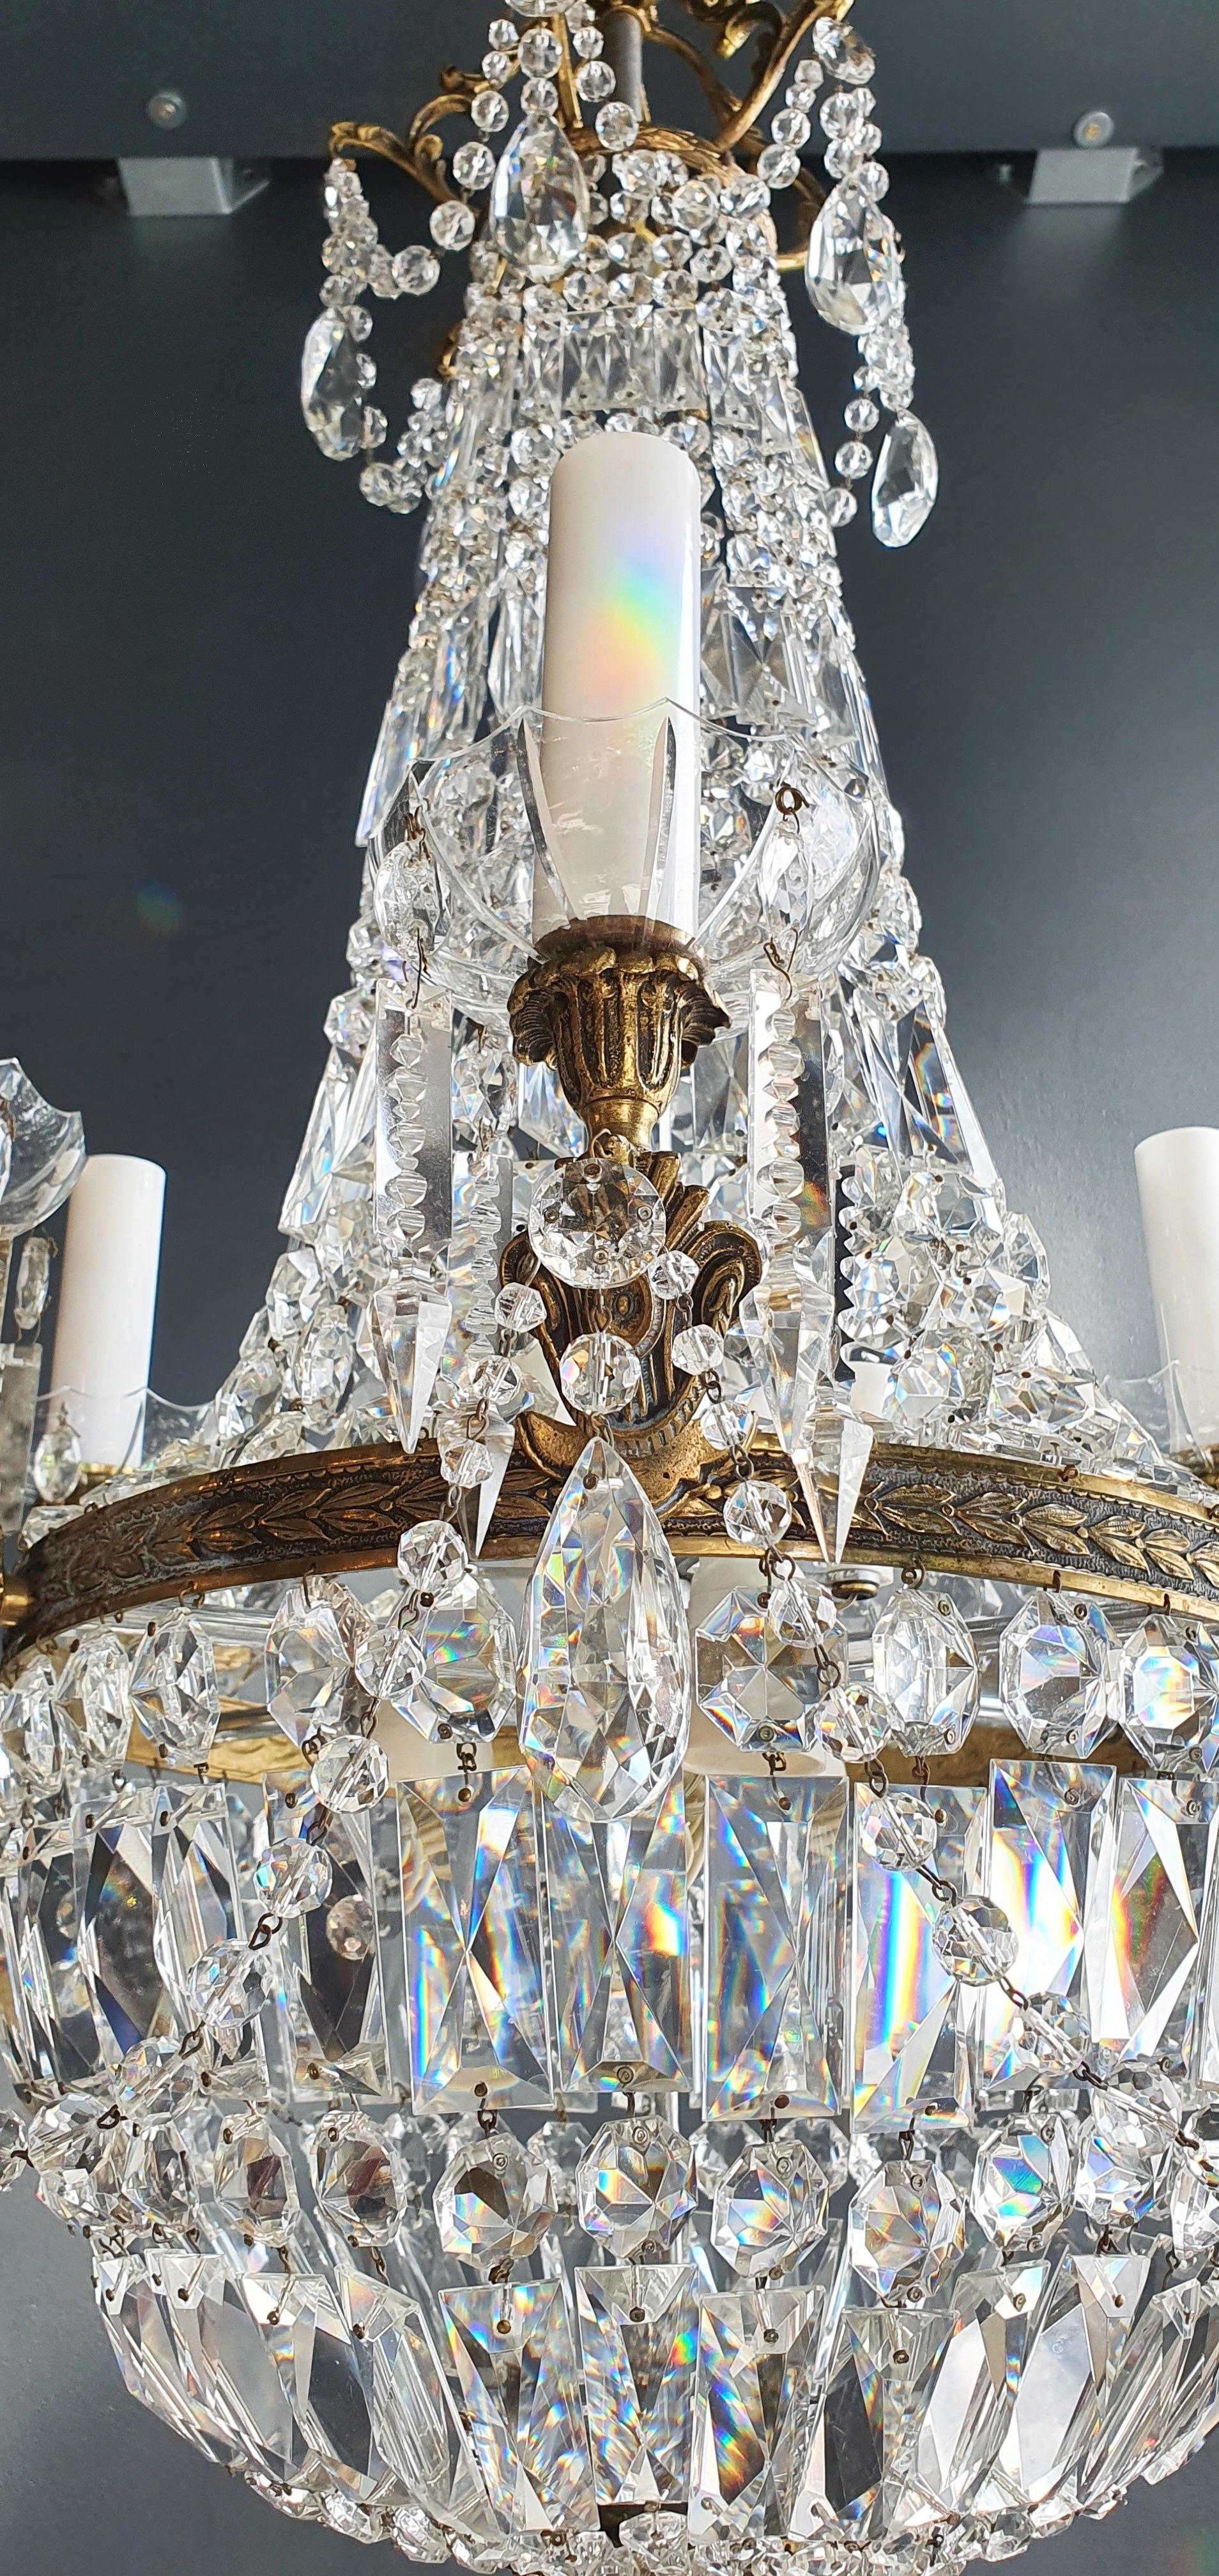 Presenting an exquisite vintage chandelier that has been lovingly and professionally restored in Berlin. Its electrical wiring has been adapted to work seamlessly in the US, making it ready for immediate use. The chandelier has undergone re-wiring